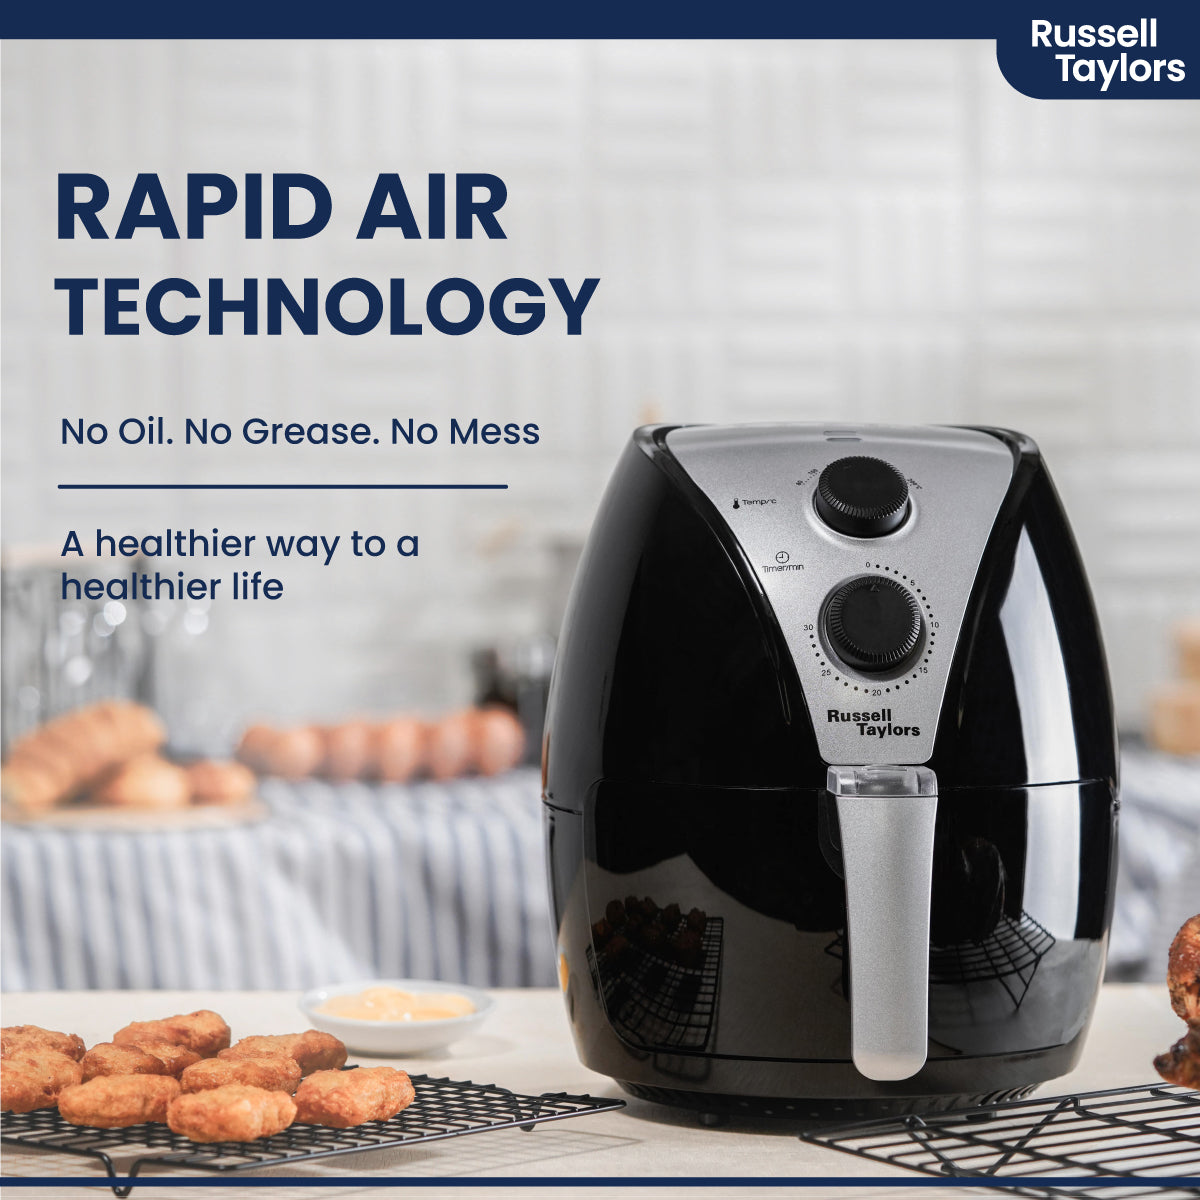 Russell Taylors Air Fryer 3.8L AF-23 (Cream)